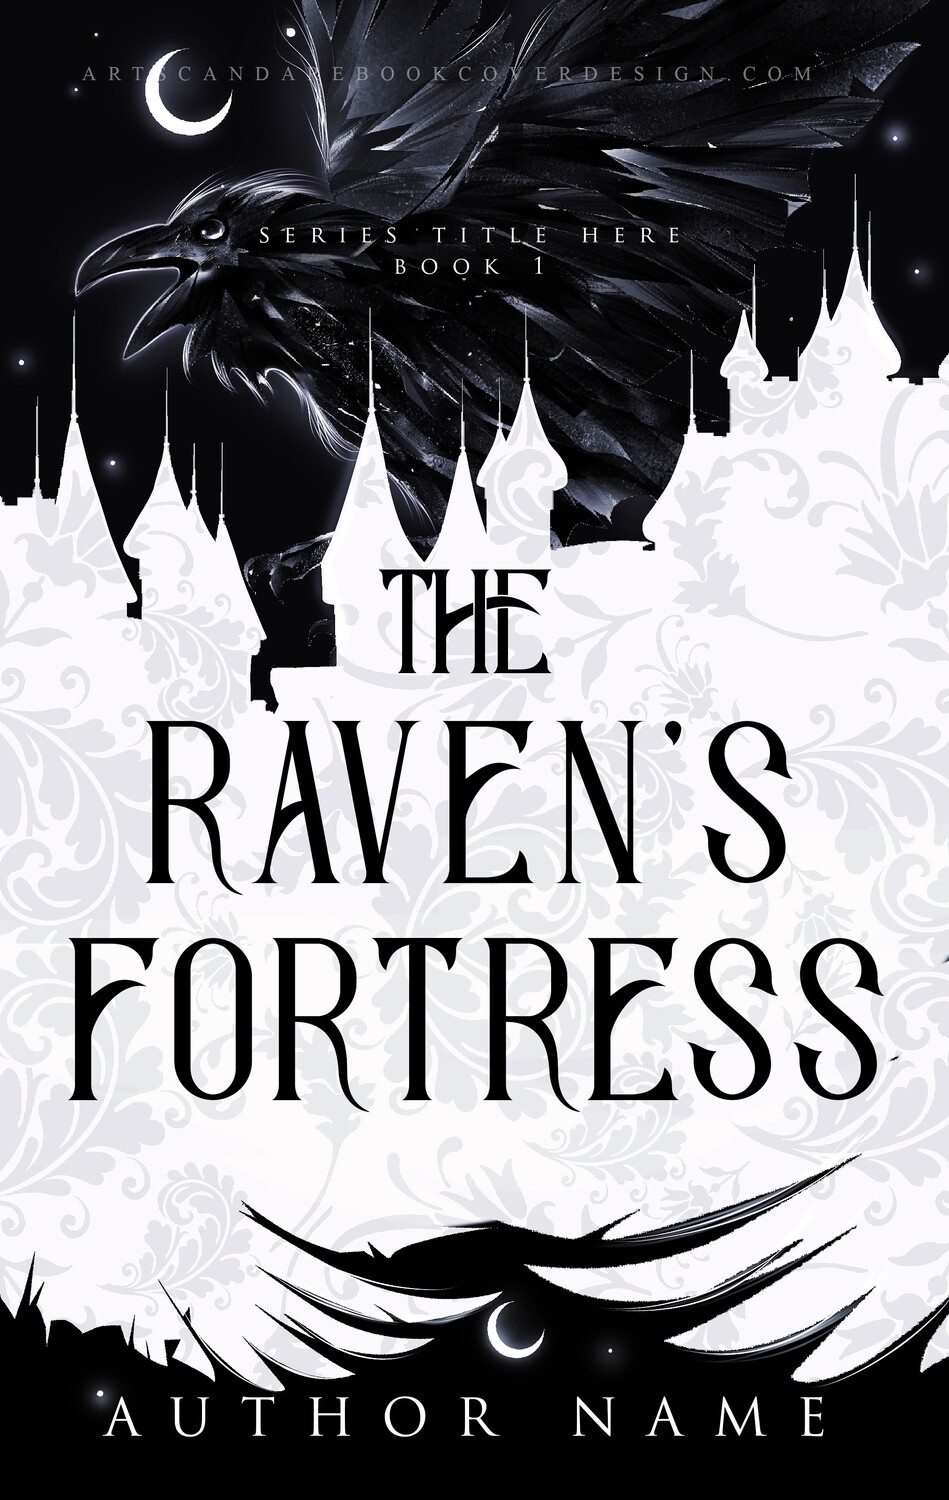 THE RAVENS FORTRESS